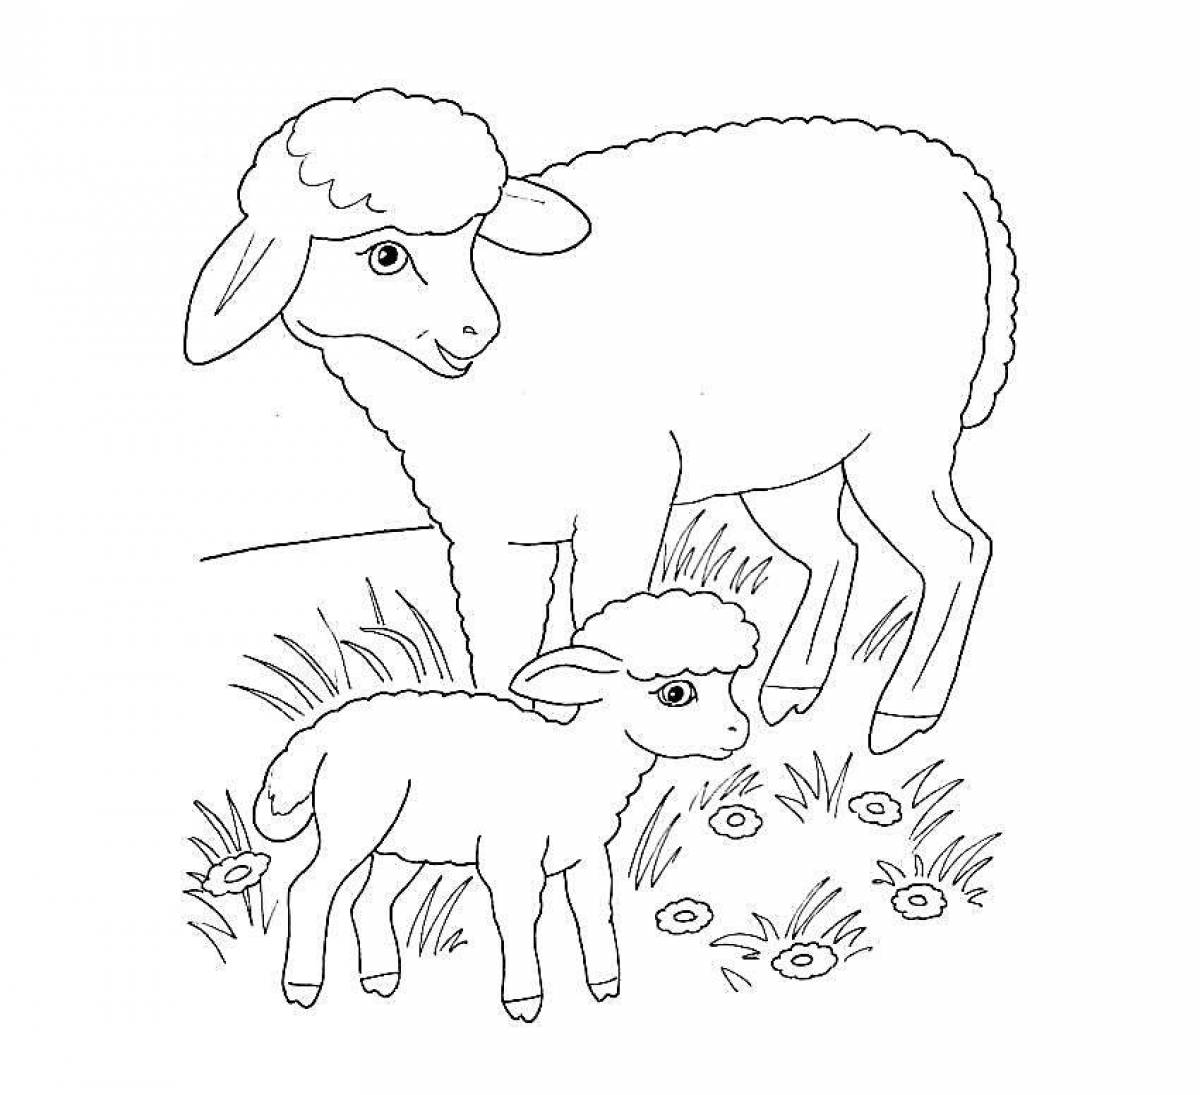 Coloring page of wild animals and their babies